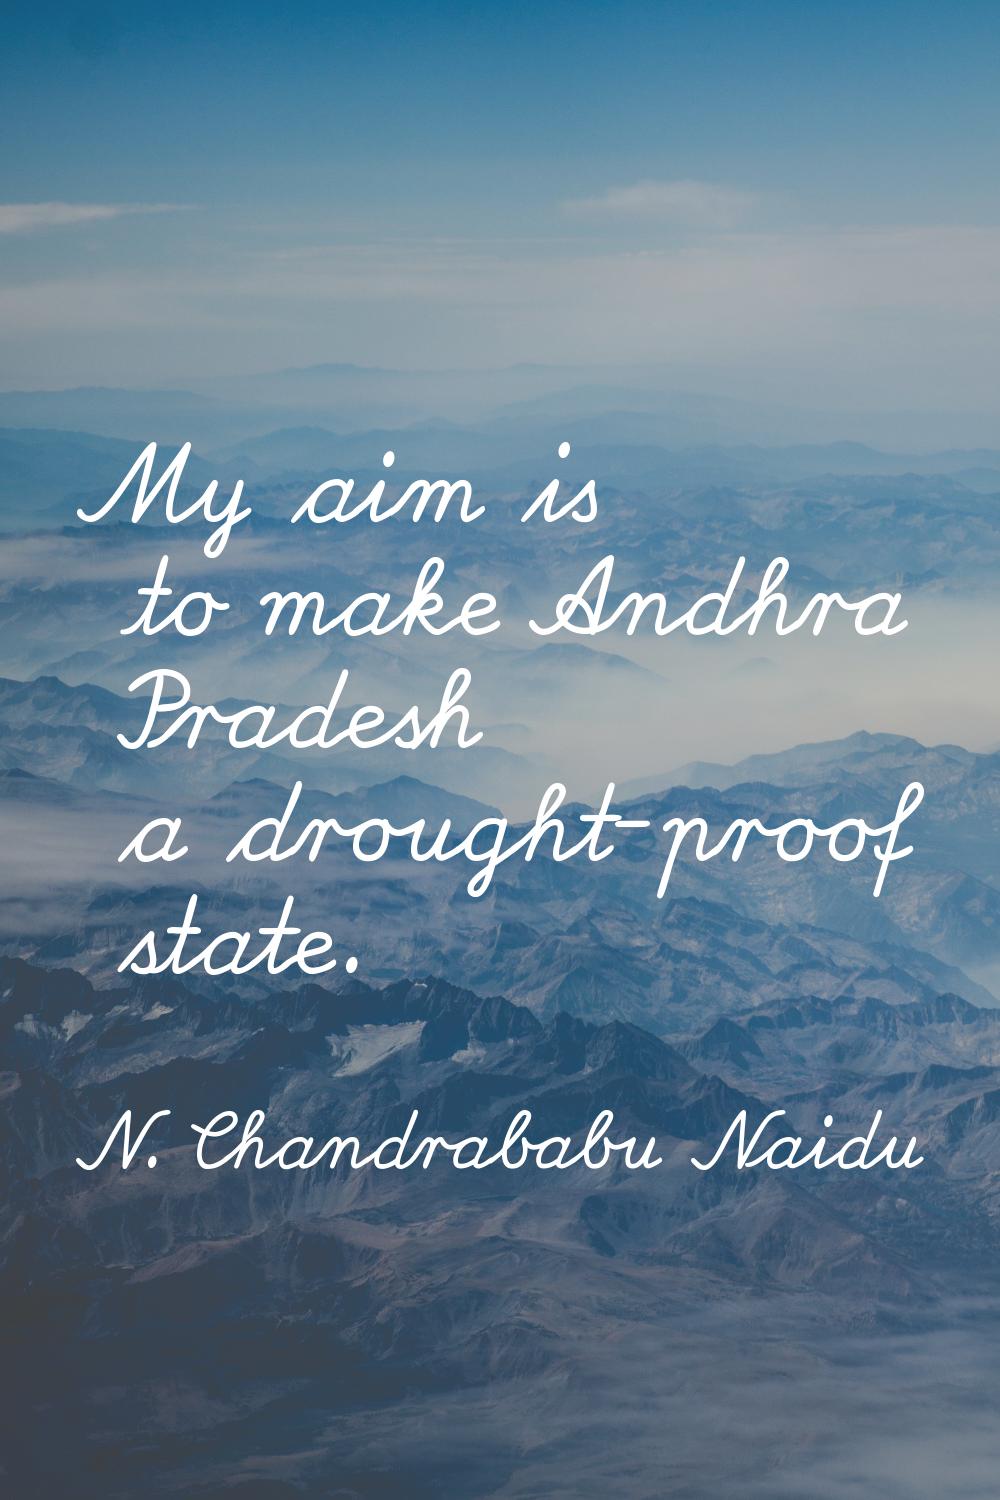 My aim is to make Andhra Pradesh a drought-proof state.